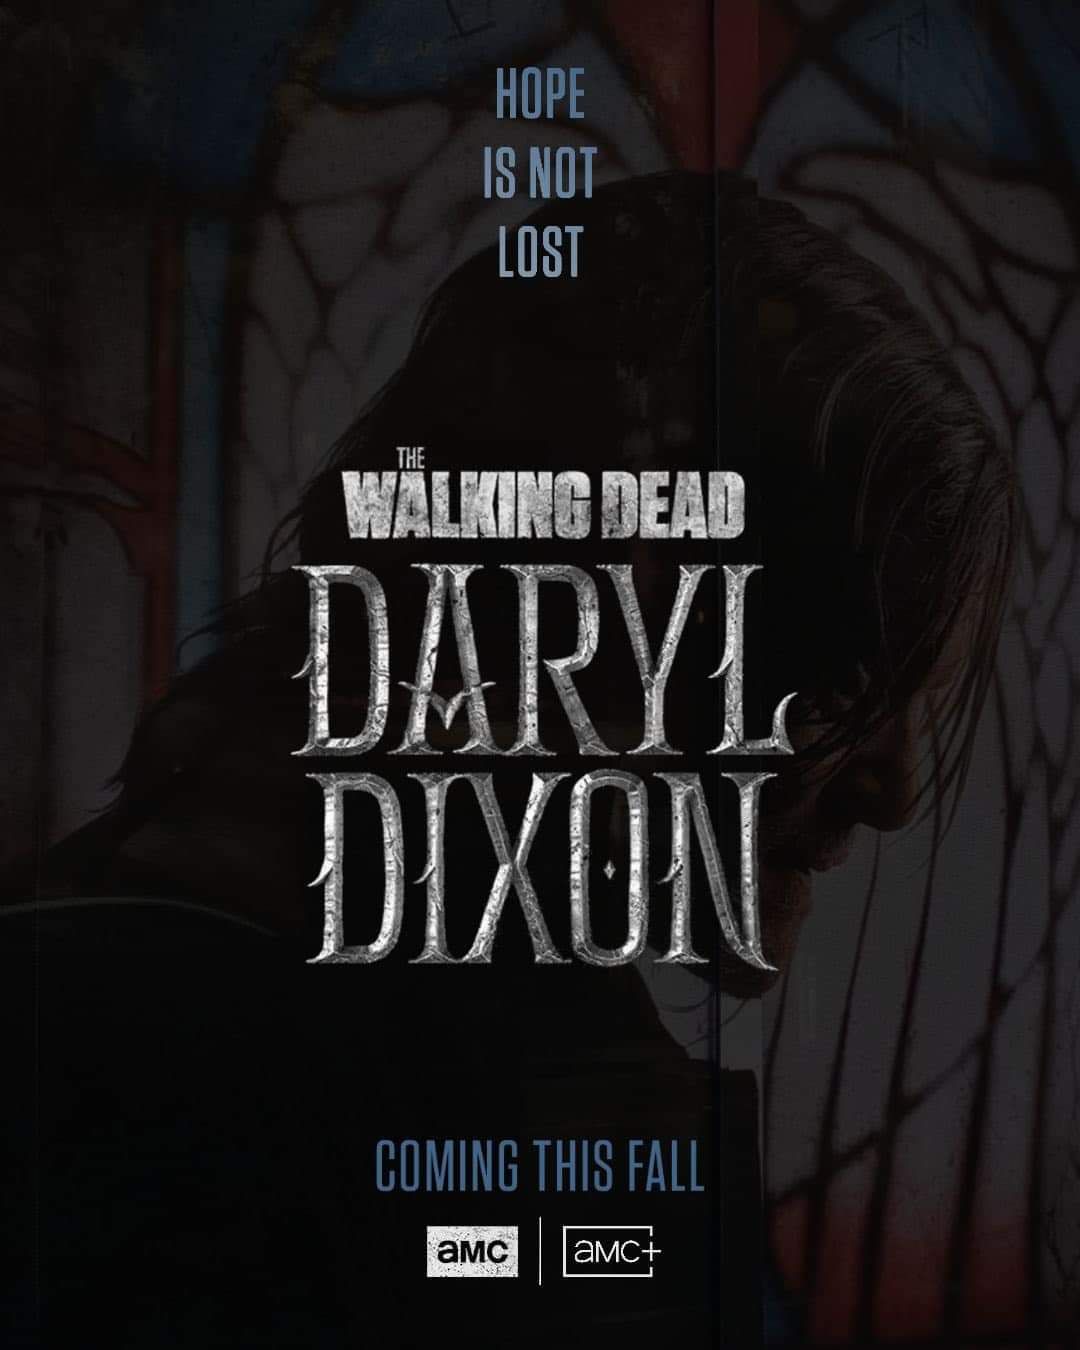 The Walking Dead Daryl Dixon Poster